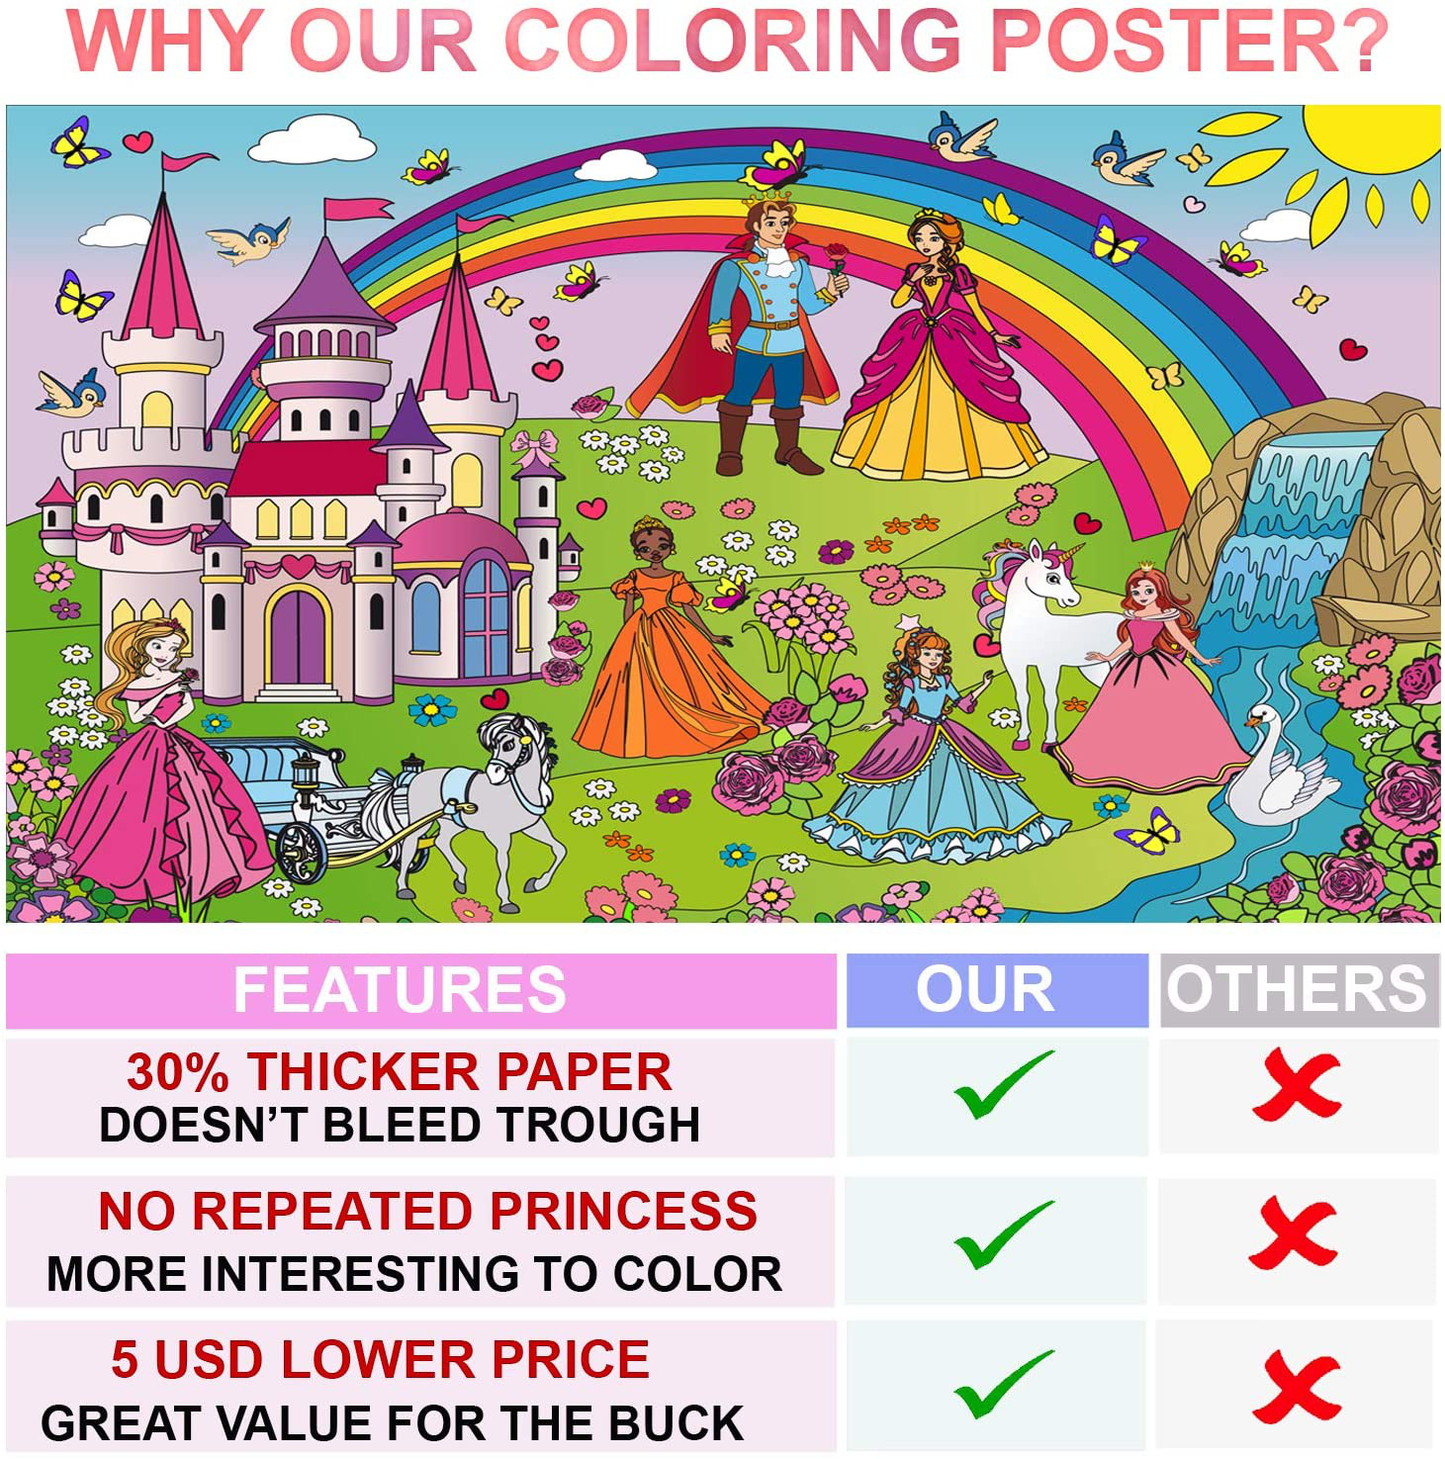 Alex Art, Large Coloring Poster - Arts and Crafts Unicorn - Jumbo Table Coloring Sheet - Giant Coloring Posters for Kids - Creative Fun Birthday Gifts for Girls - Extra Huge Big Page Wall Size